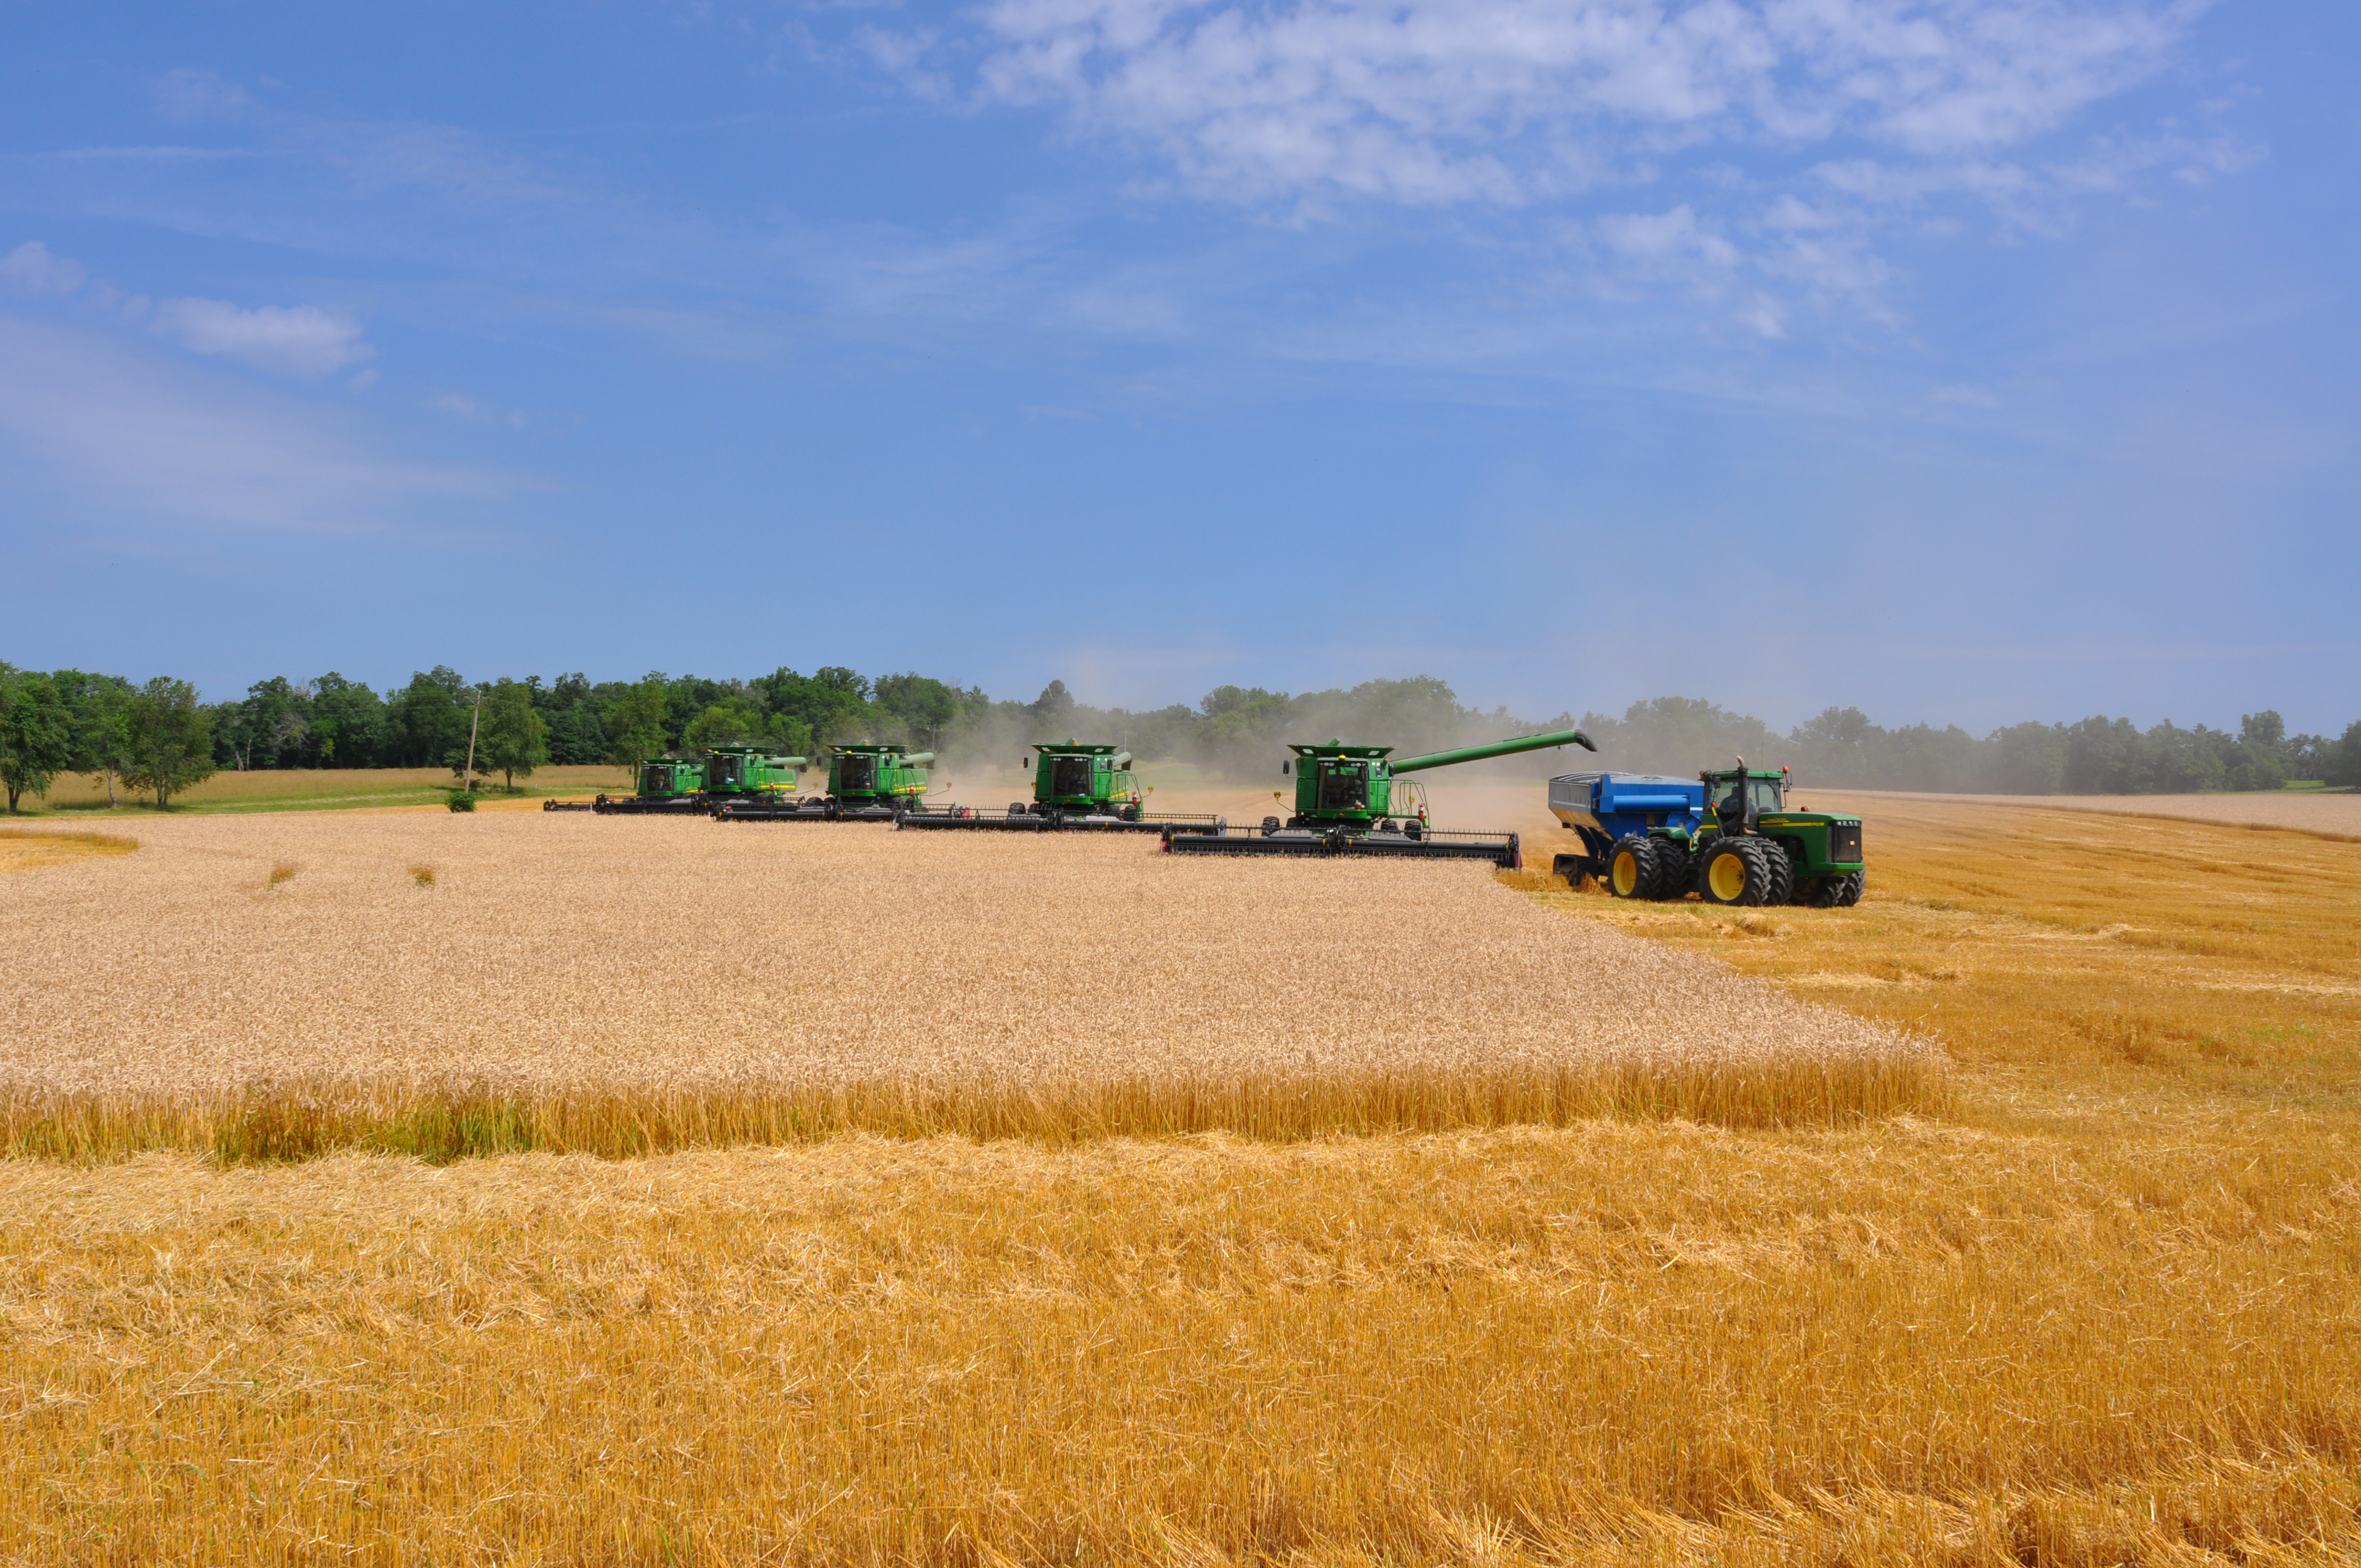 This agronomic image shows combines harvesting wheat.